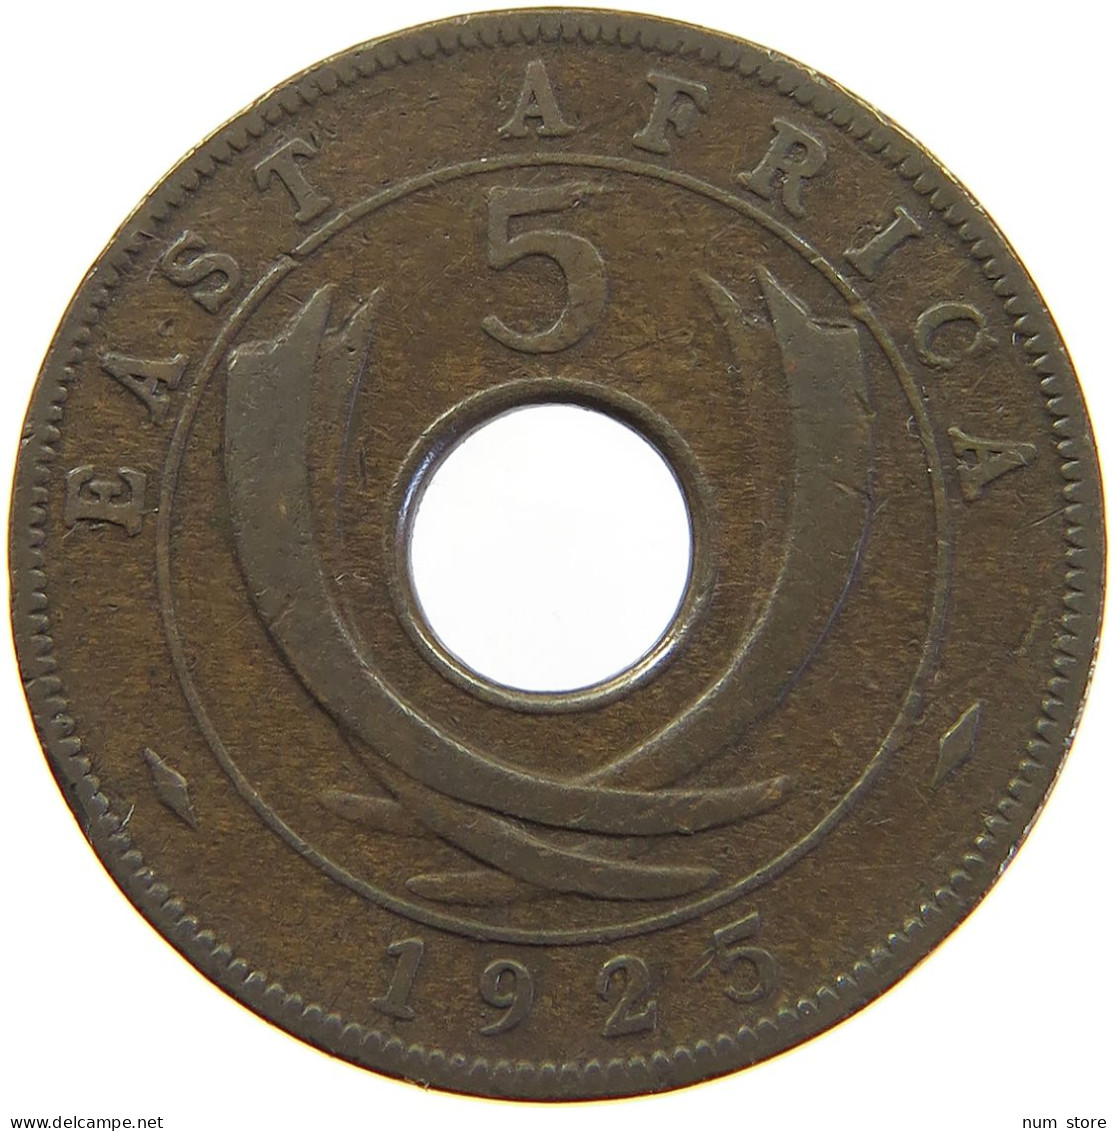 EAST AFRICA 5 CENTS 1925 GEORGE V. (1910-1936) #MA 065522 - British Colony